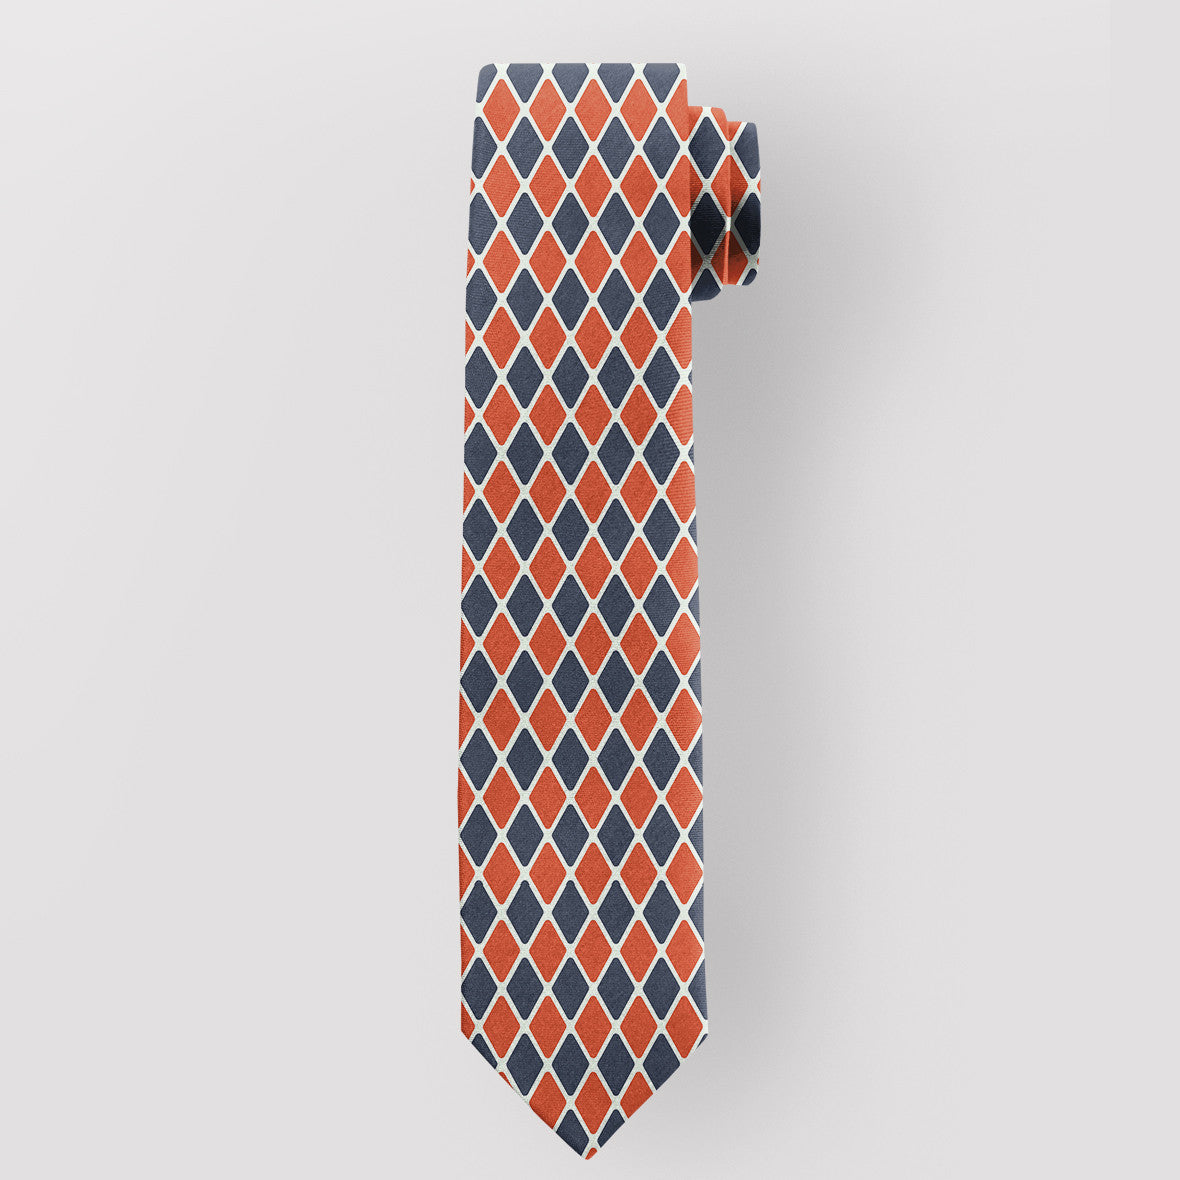 11+ Neck Tie Mockup Free Background Yellowimages - Free PSD Mockup Templates